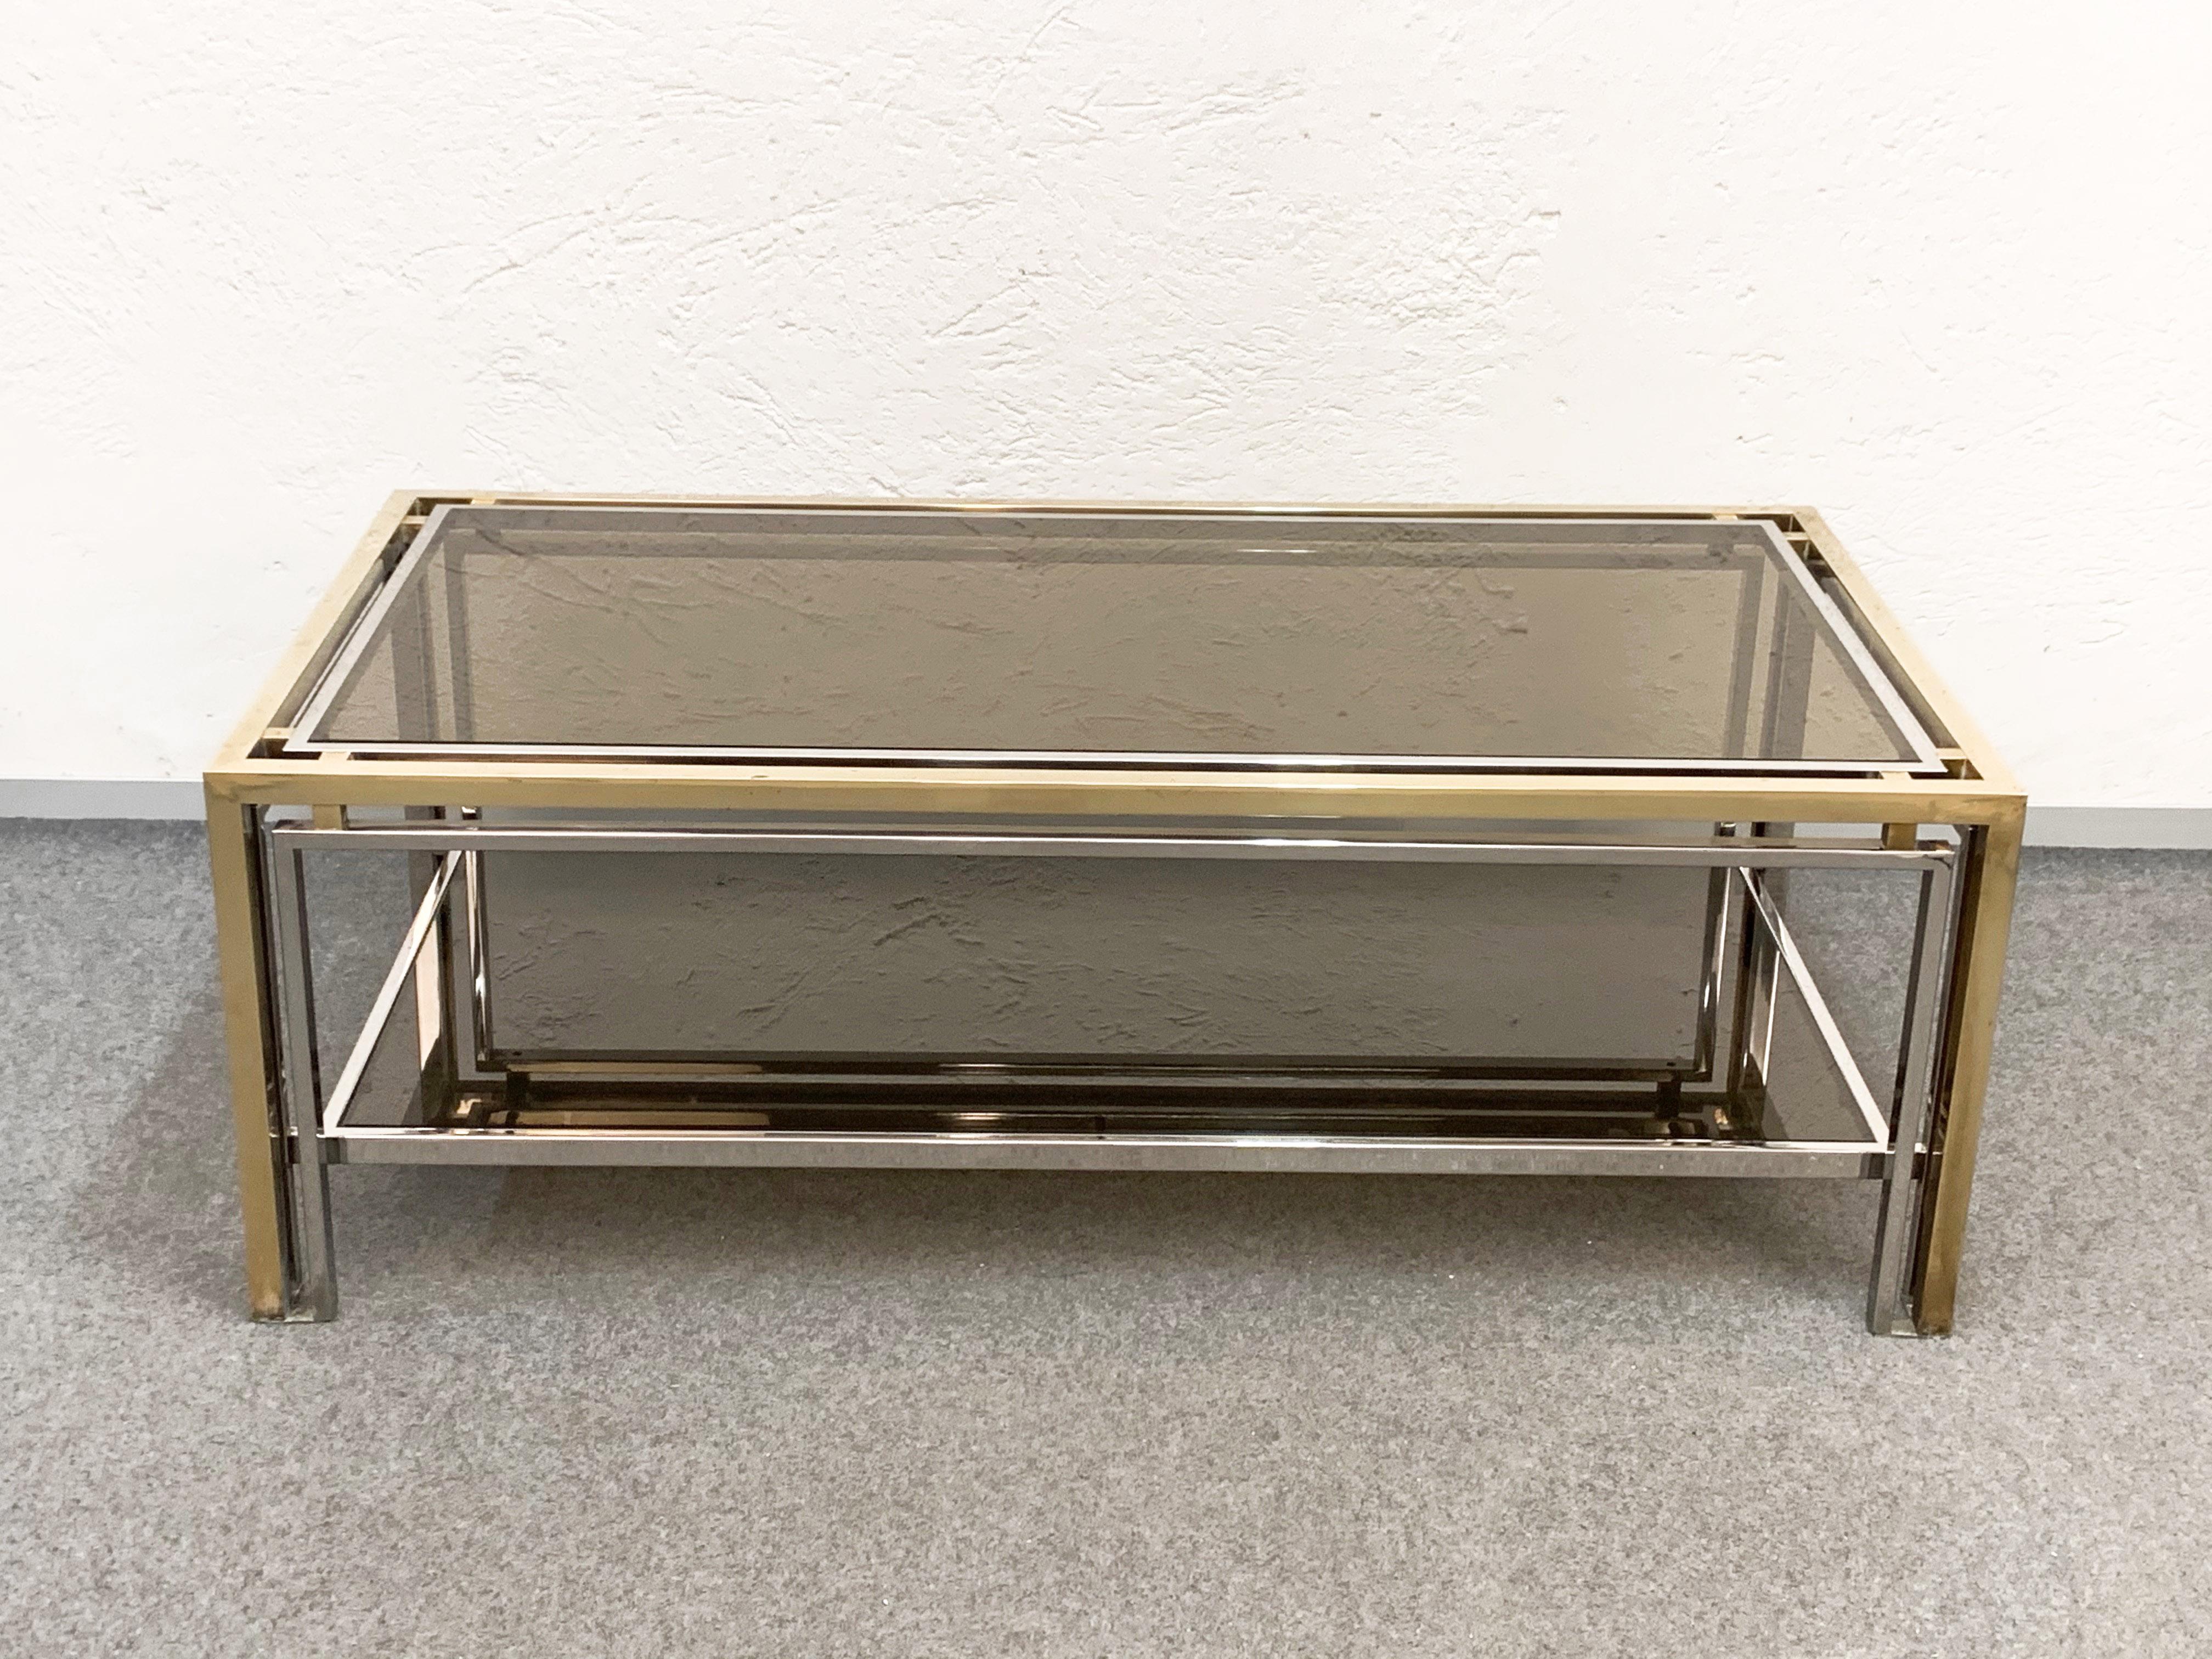 Wonderful large and iconic coffee table attributed to Romeo Rega, one of the few produced during 1970s.

Like most of Rega's production, this modernist piece with clean lines is characterized by a two-level rectangular geometric shape and a